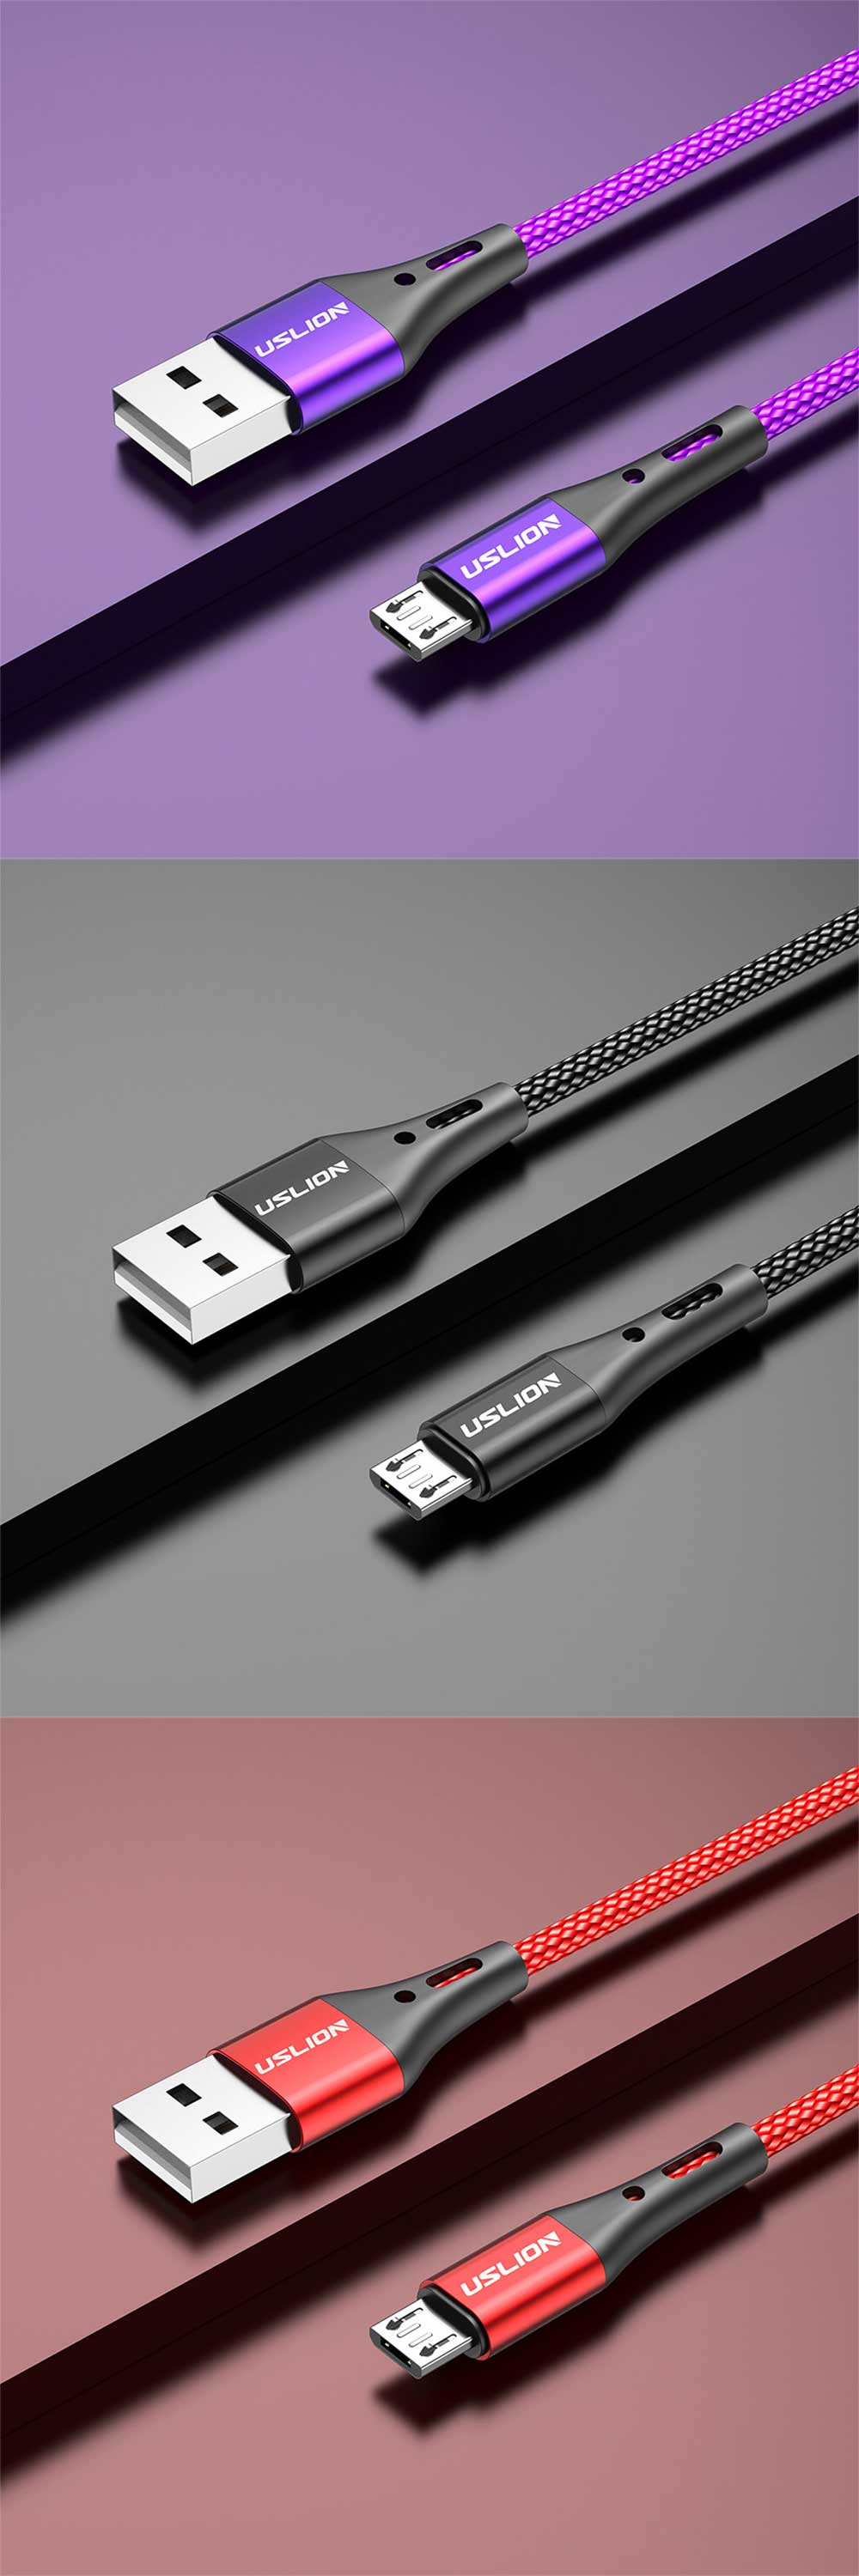 USLION 3A USB-A to Micro USB Cable QC2.0 QC3.0 Fast Charging Data Transmission Nylon Weaving Core Line 0.5M/1M/2M Long for Oneplus 7 Huawei P30 MI9 S10 S10+